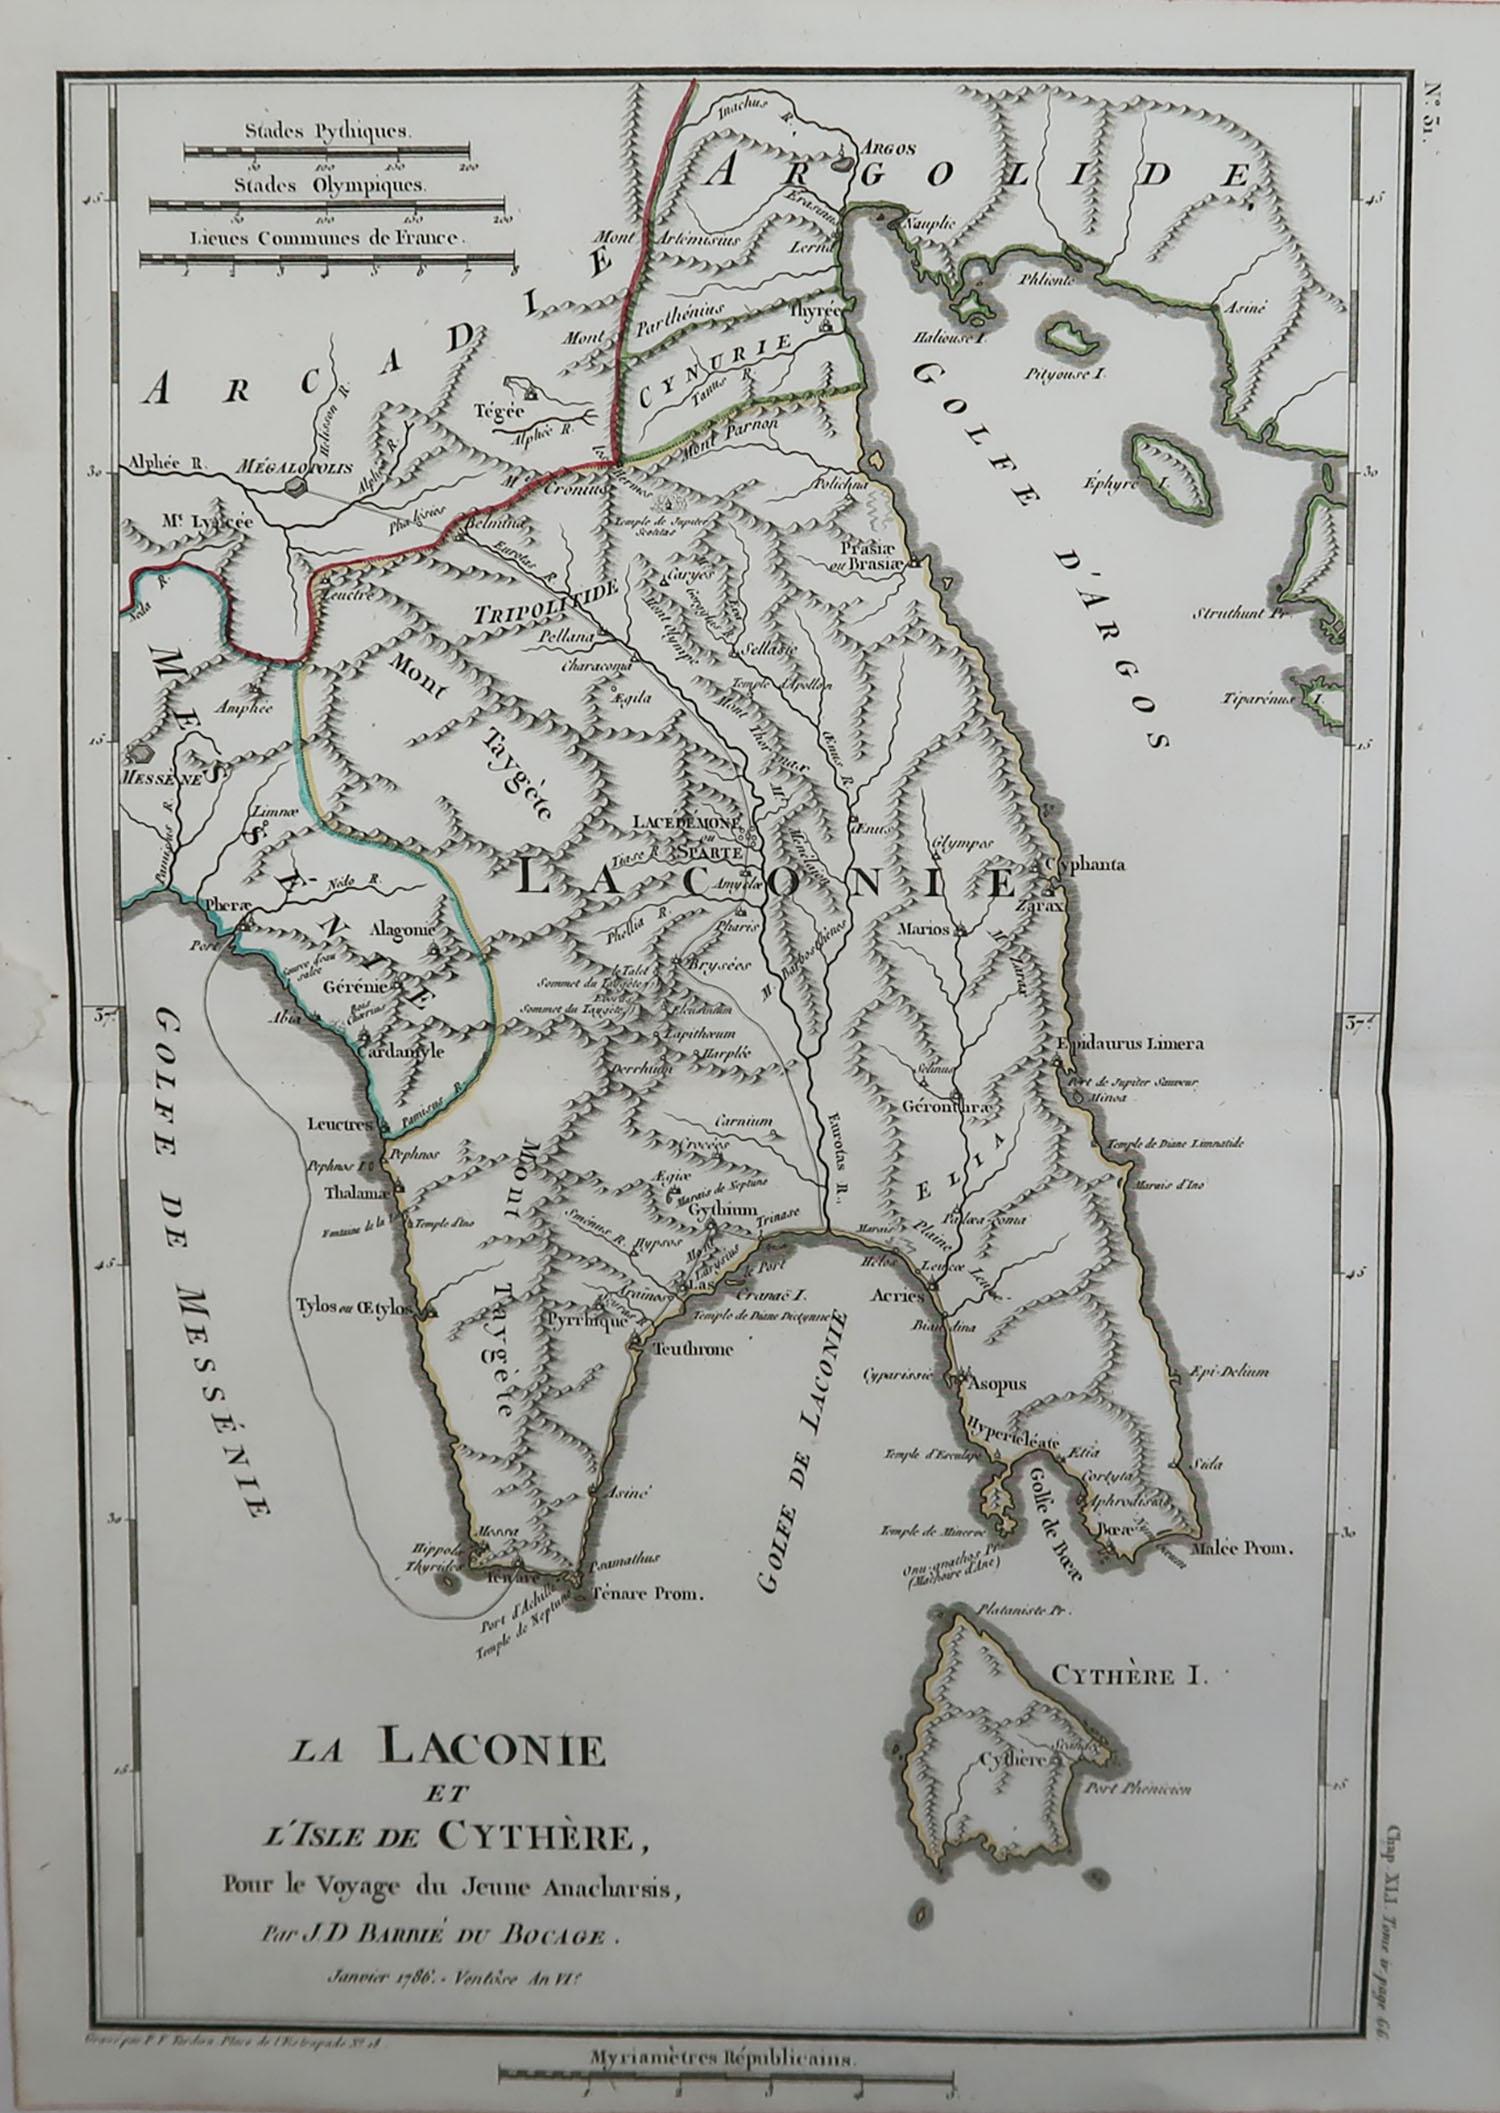 Great map of Ancient Greece. Showing the region of Laconia including the island of Cythera.

Drawn by J.D. Barbie Du Bocage

Copper plate engraving by P.F Tardieu

Original hand color outline.

Published 1786

Unframed.

Repair to a